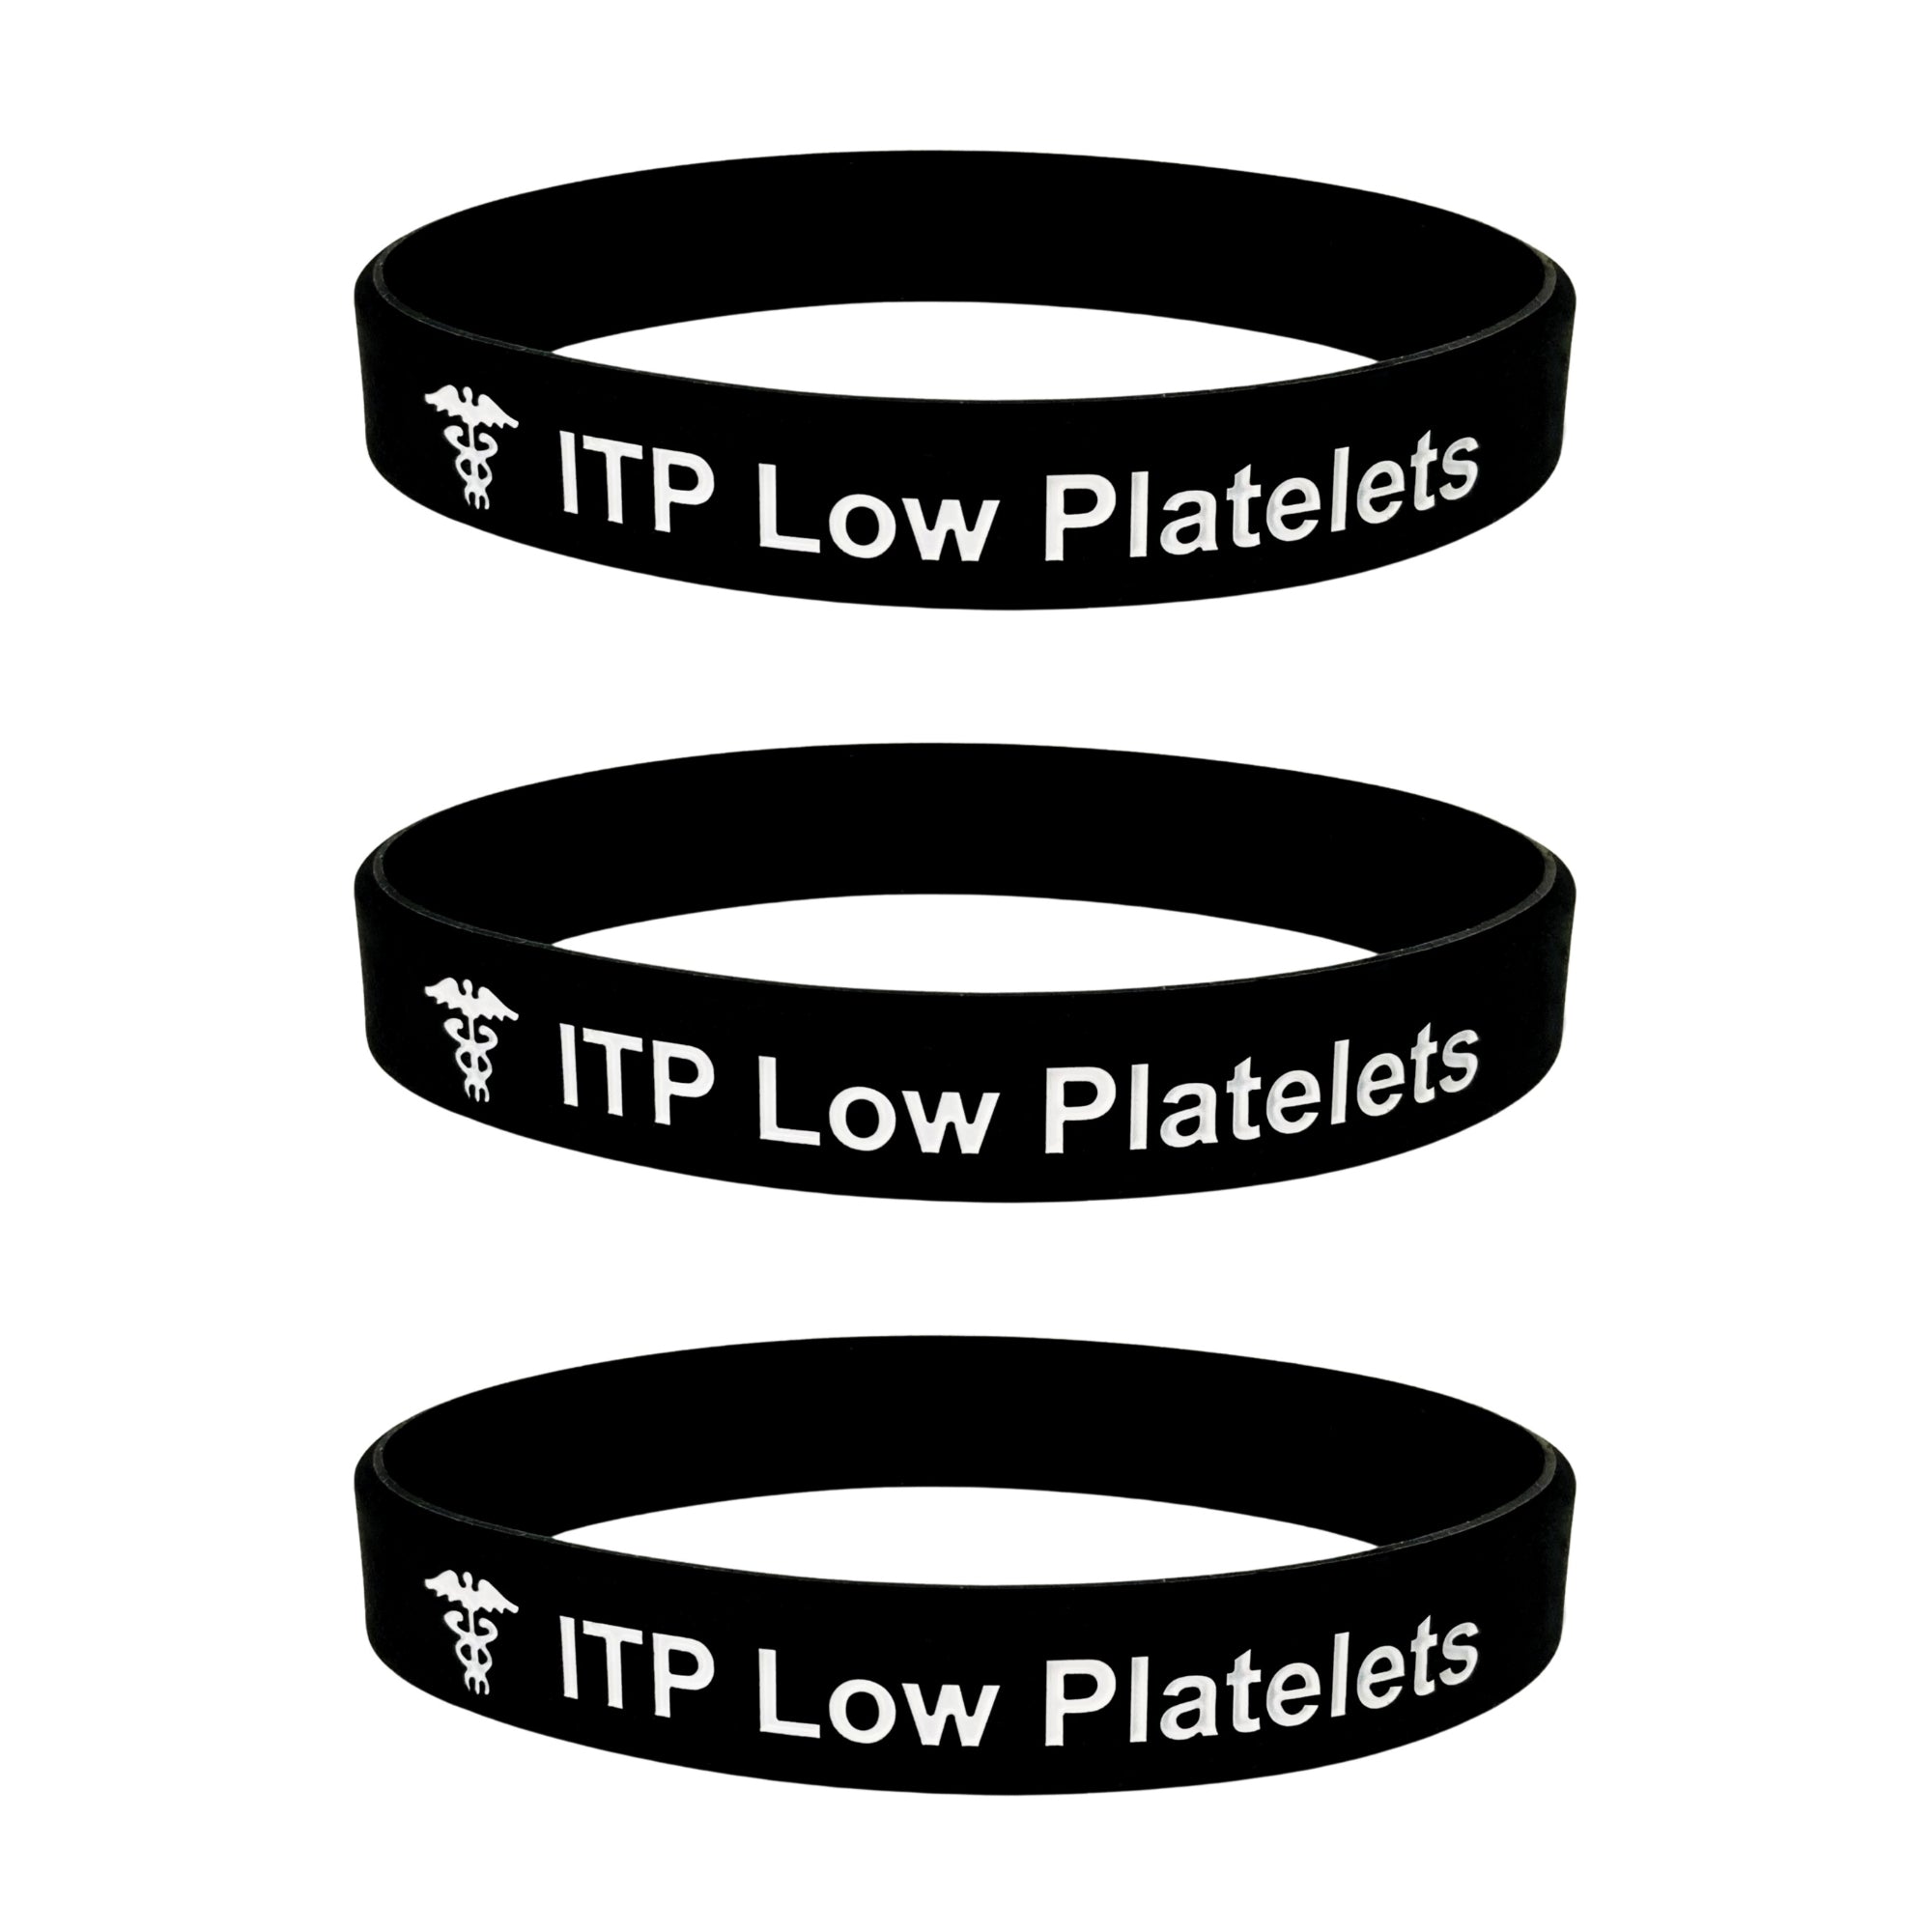 Bleeding Disorder Wristband For Low Platelets  Black White Silicone Band   Butler and Grace Ltd